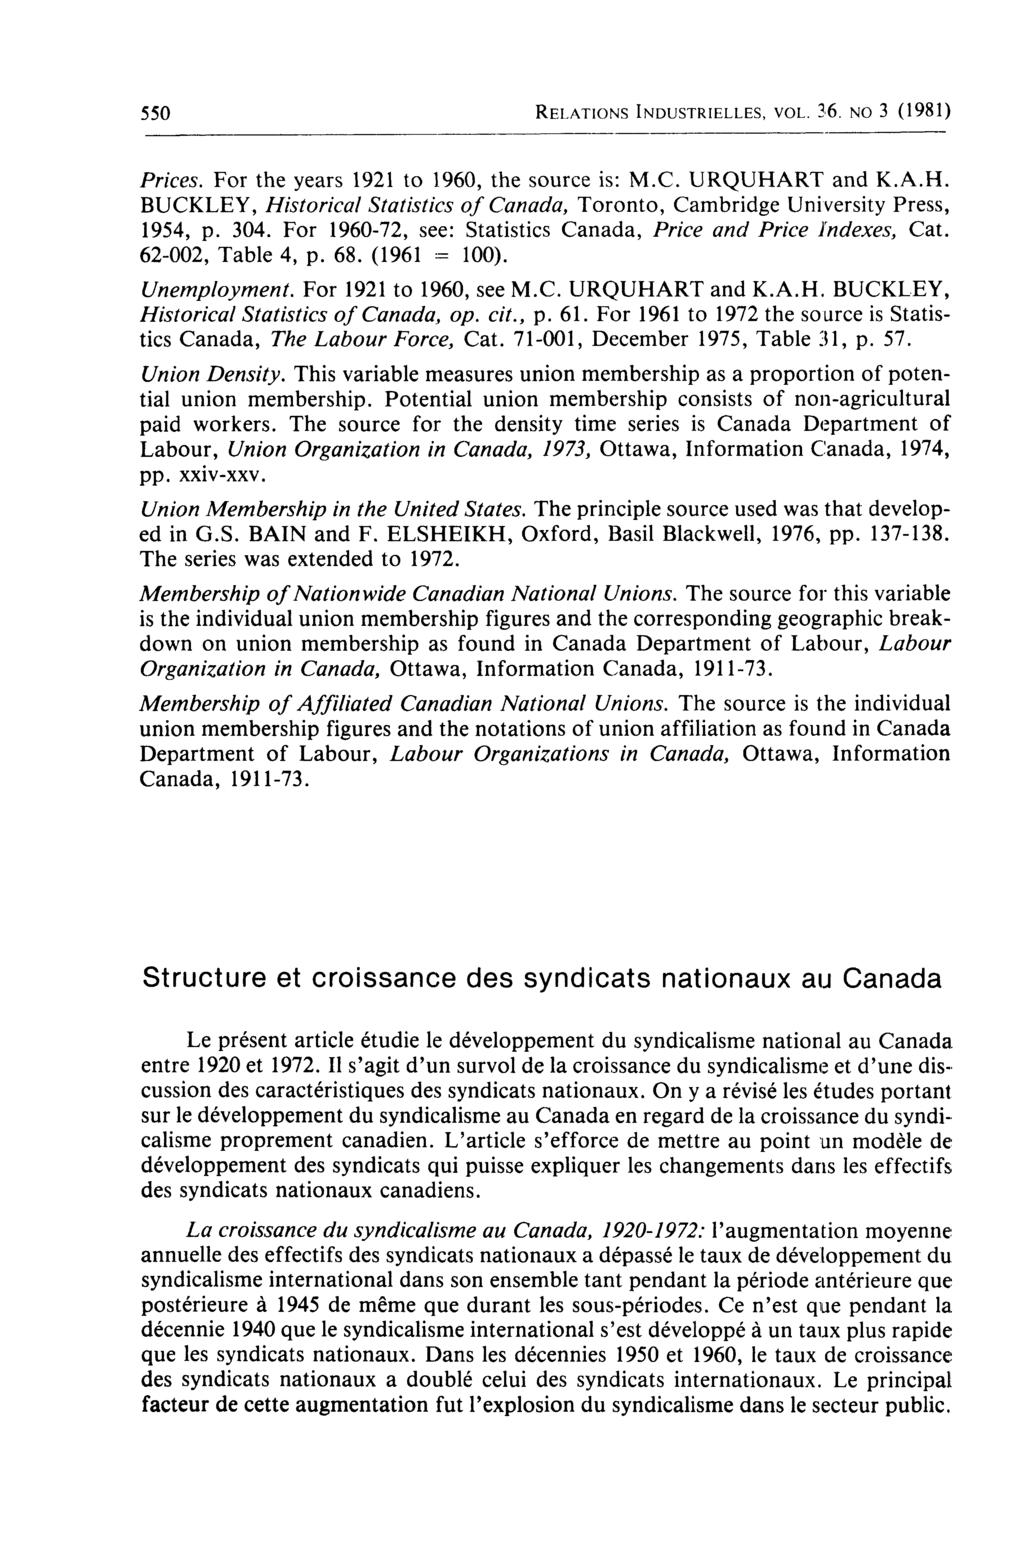 550 RELATIONS INDUSTRIELLES, VOL. 36. NO 3 (1981) Priées. For the years 1921 to 1960, the source is: M.C. URQUHART and K.A.H. BUCKLEY, Historical Statistics of Canada, Toronto, Cambridge University Press, 1954, p.